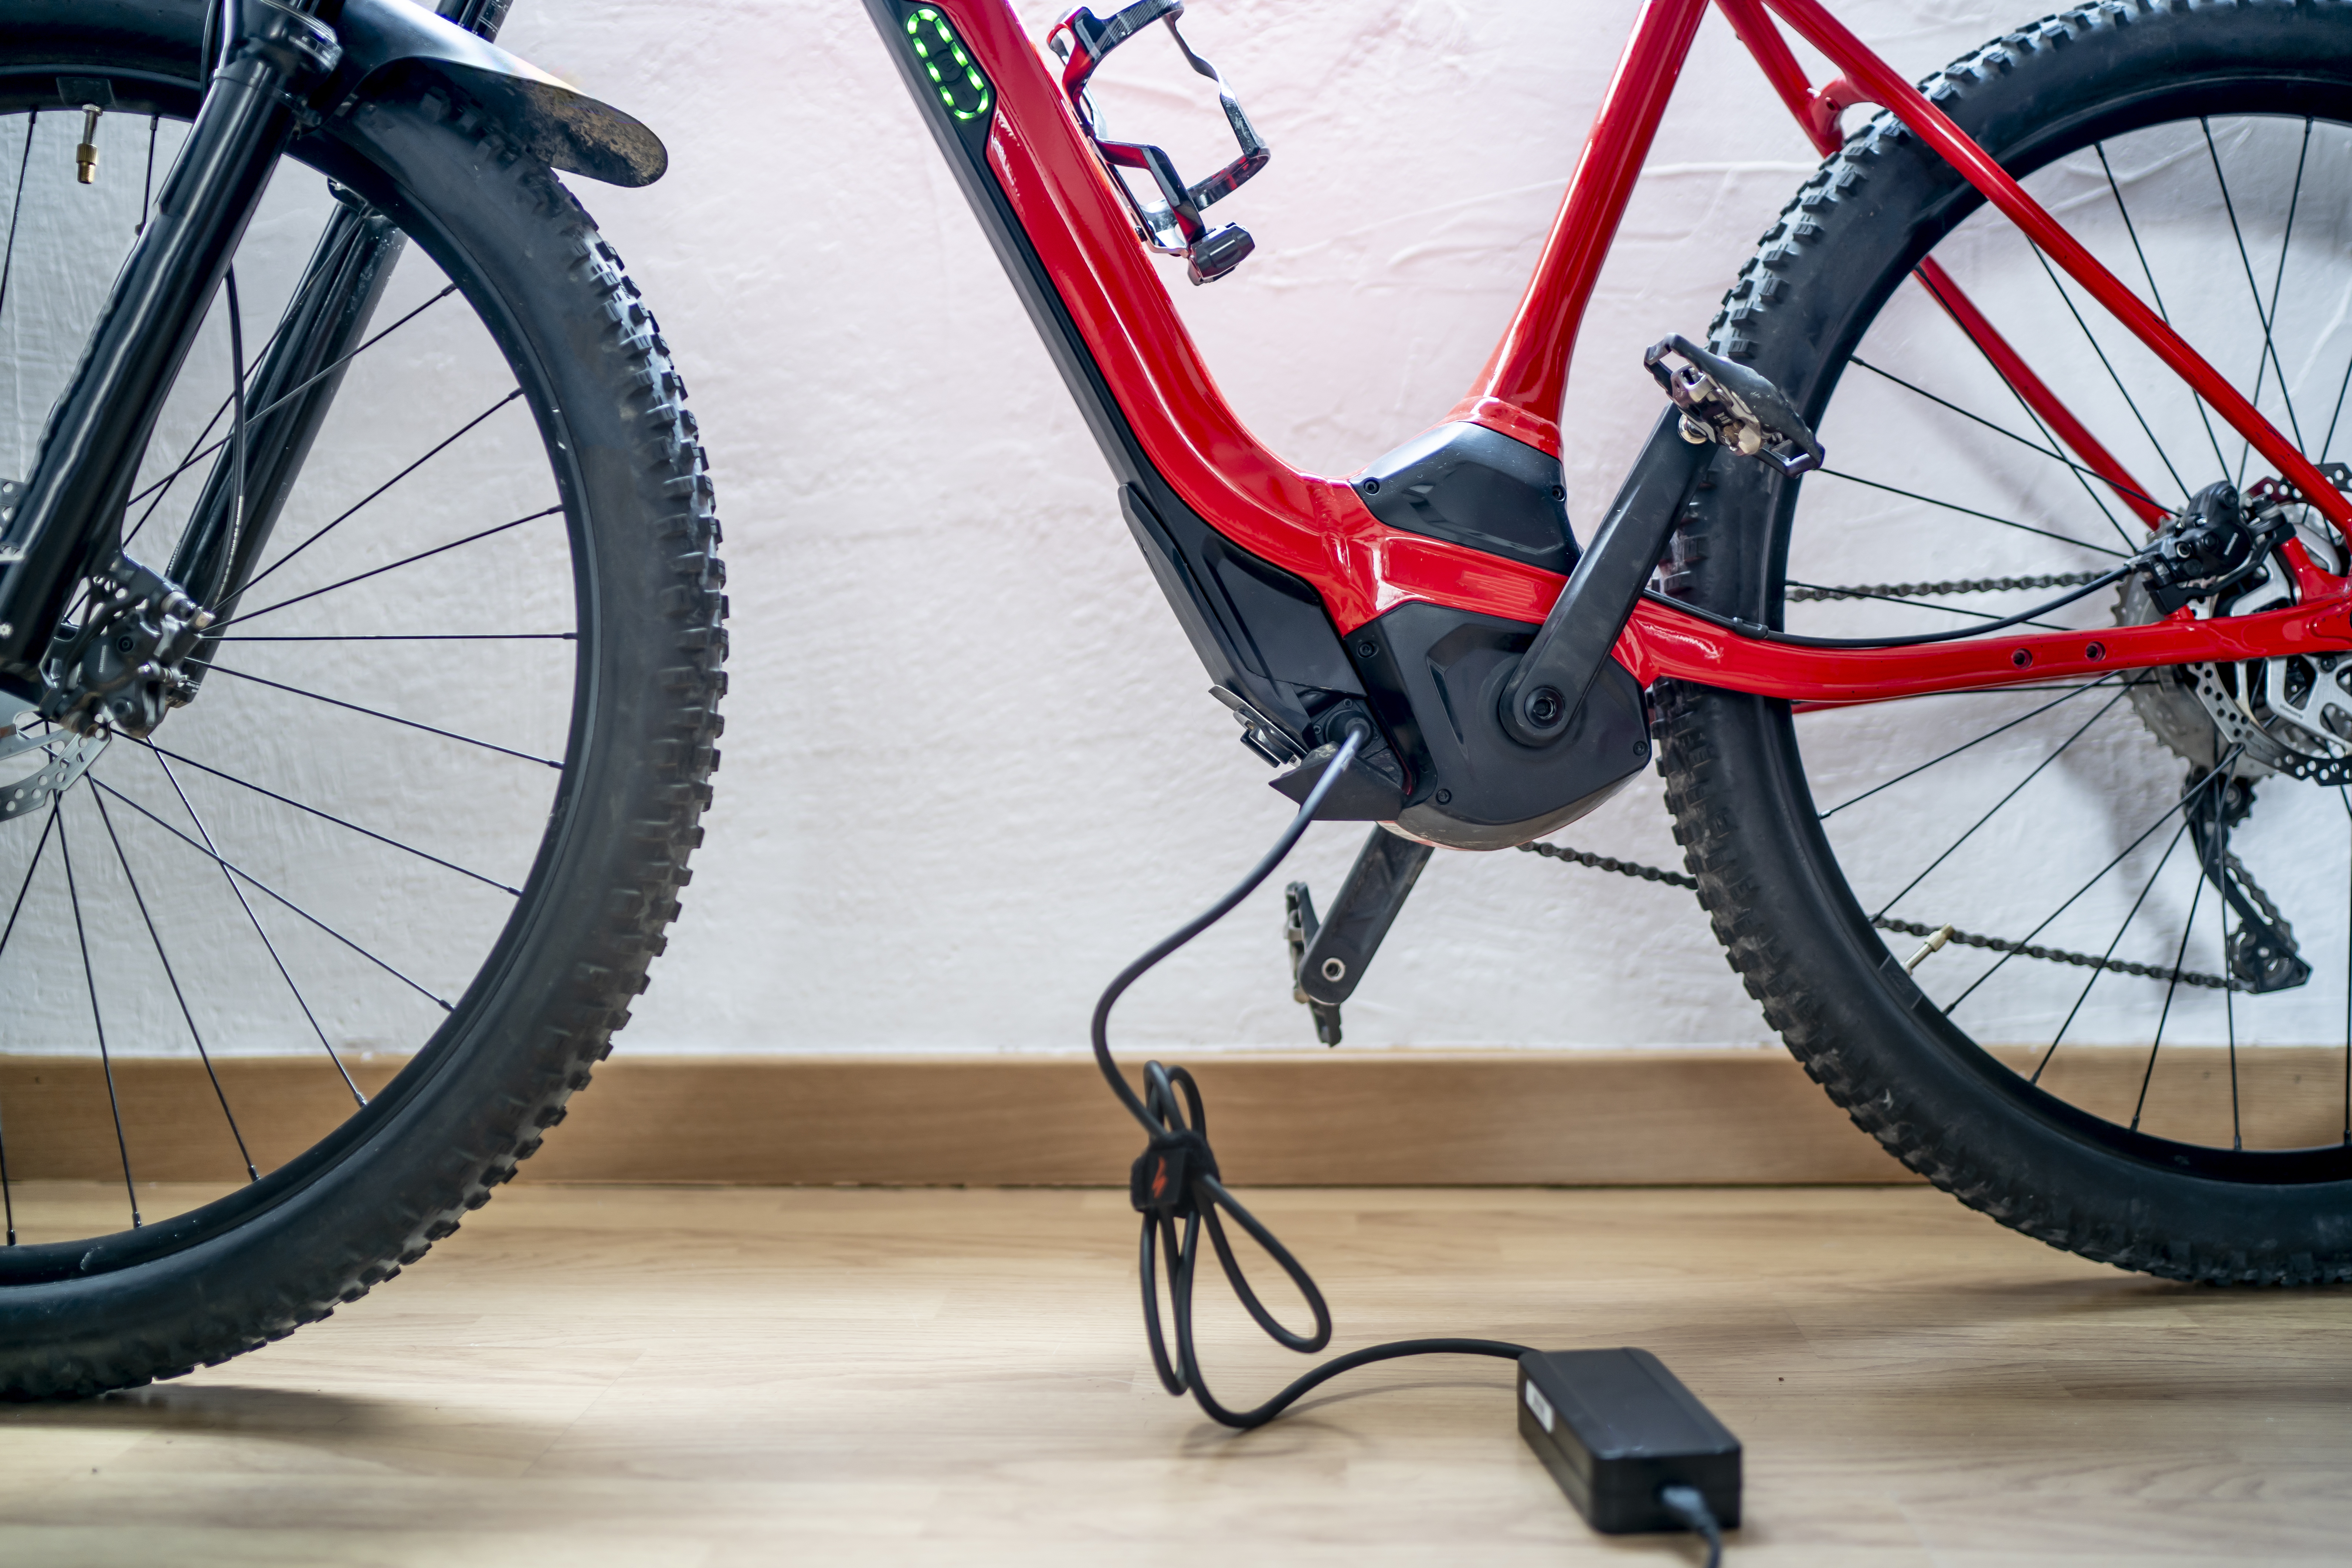 Fire Safety: Handling Lithium-Ion Batteries in E-Bikes & E-Scooters